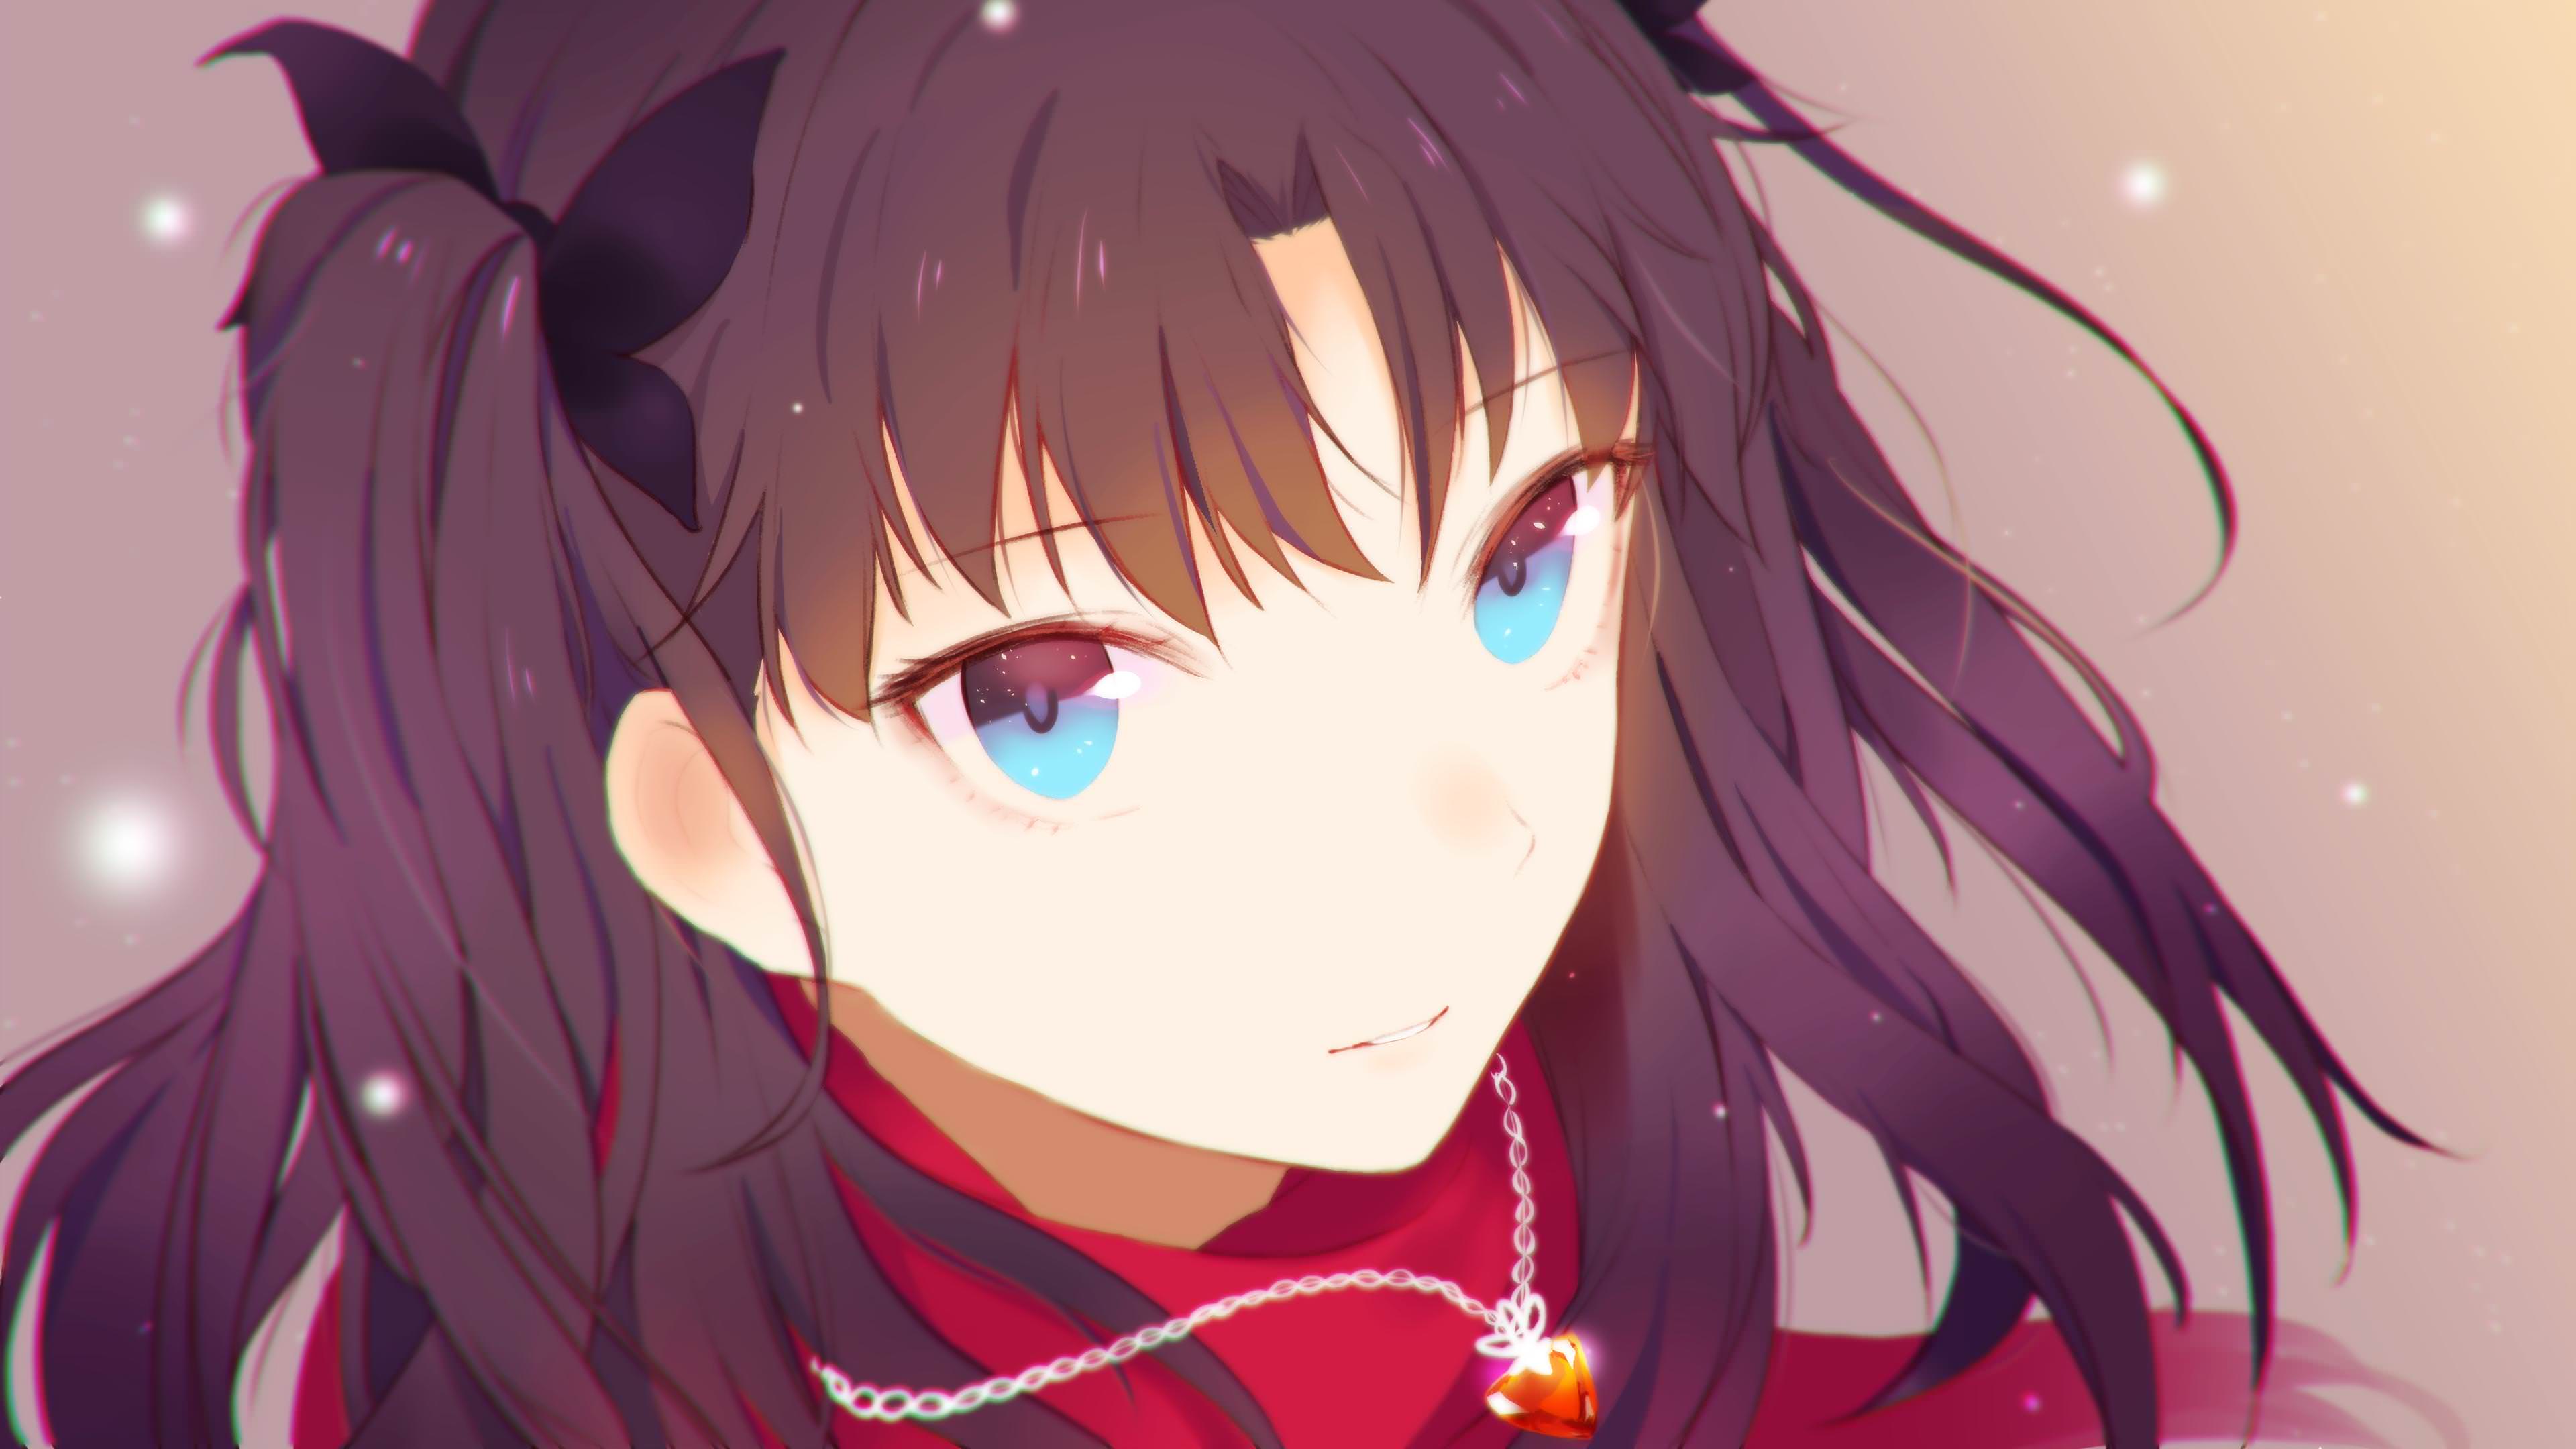 Rin Tohsaka Fate Stay Night Anime 4k, HD Anime, 4k Wallpaper, Image, Background, Photo and Picture